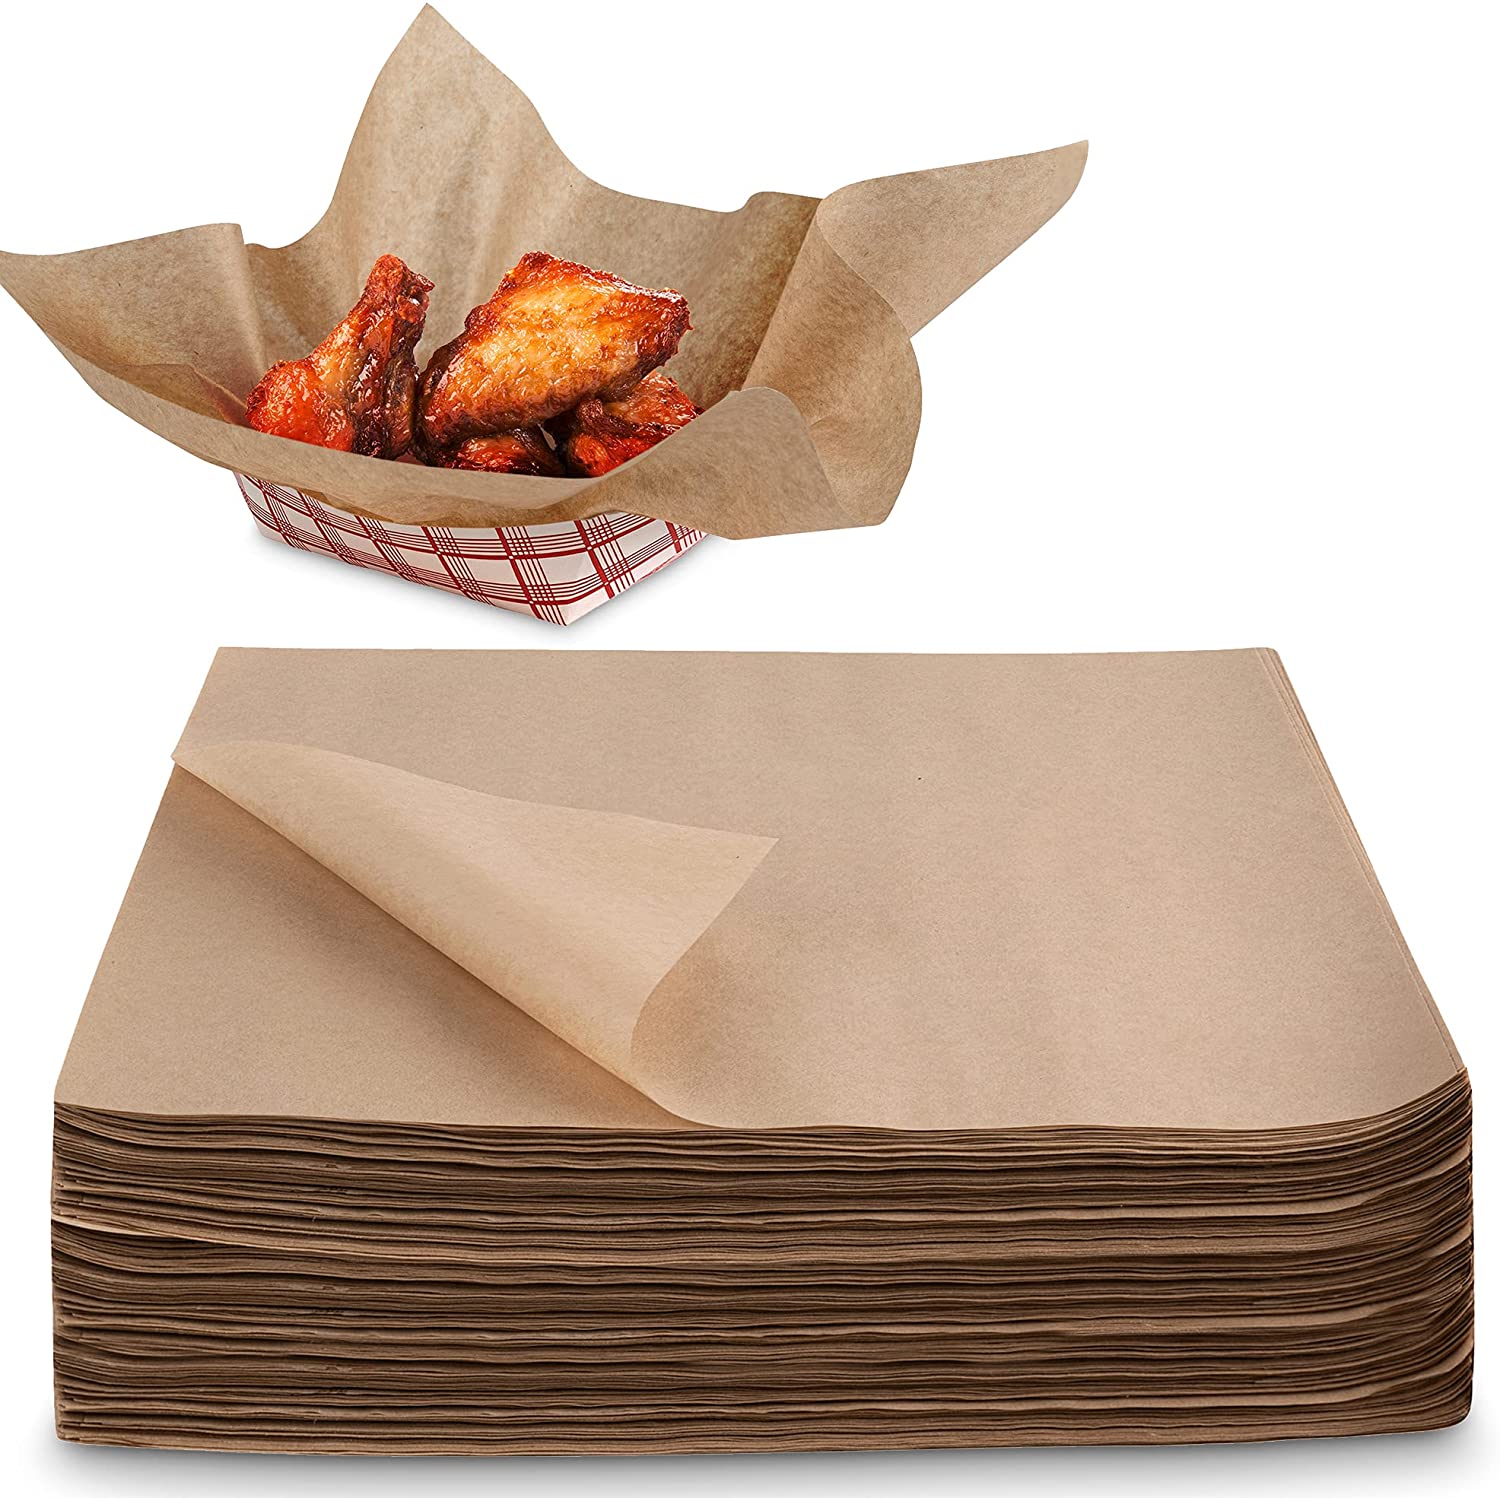 Stock Your Home 12 x 12 Grease Proof Deli Wrapper (500 Pack) - Pre Cut